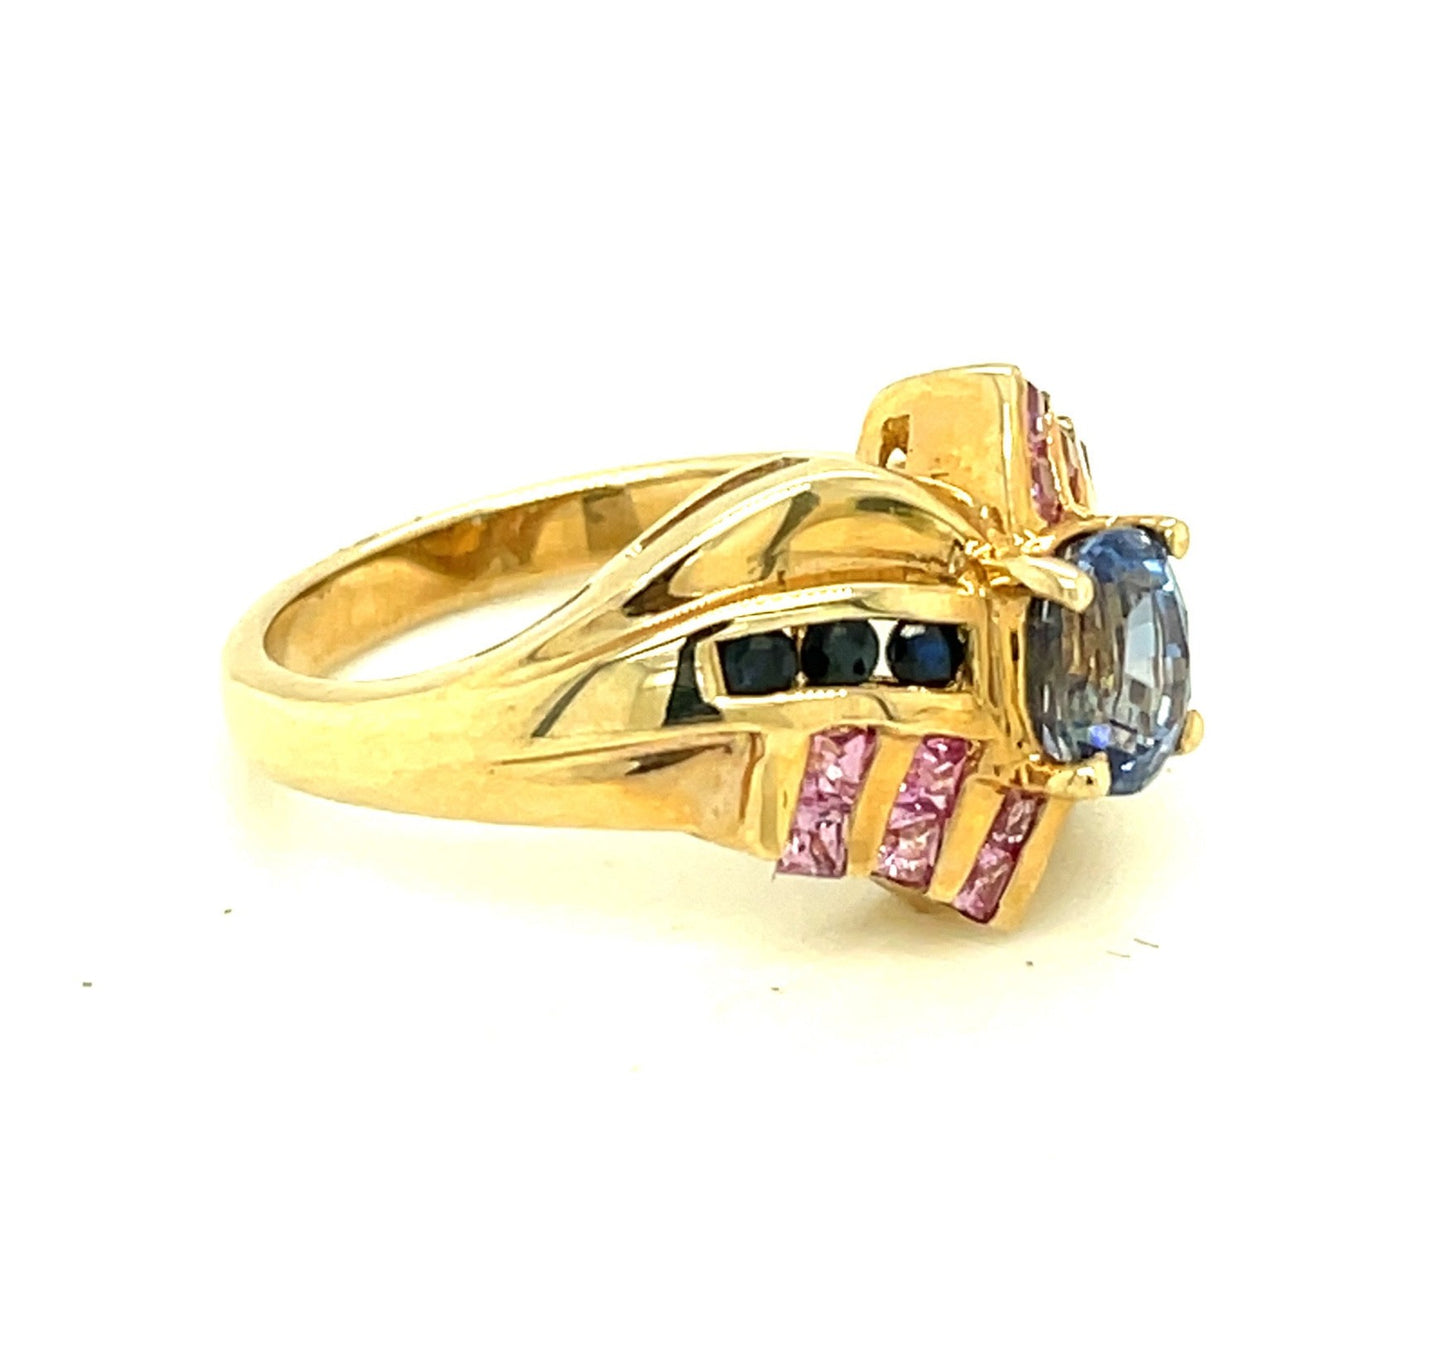 Vintage 10k Ring with Multicolored Spinel Stones Size 5